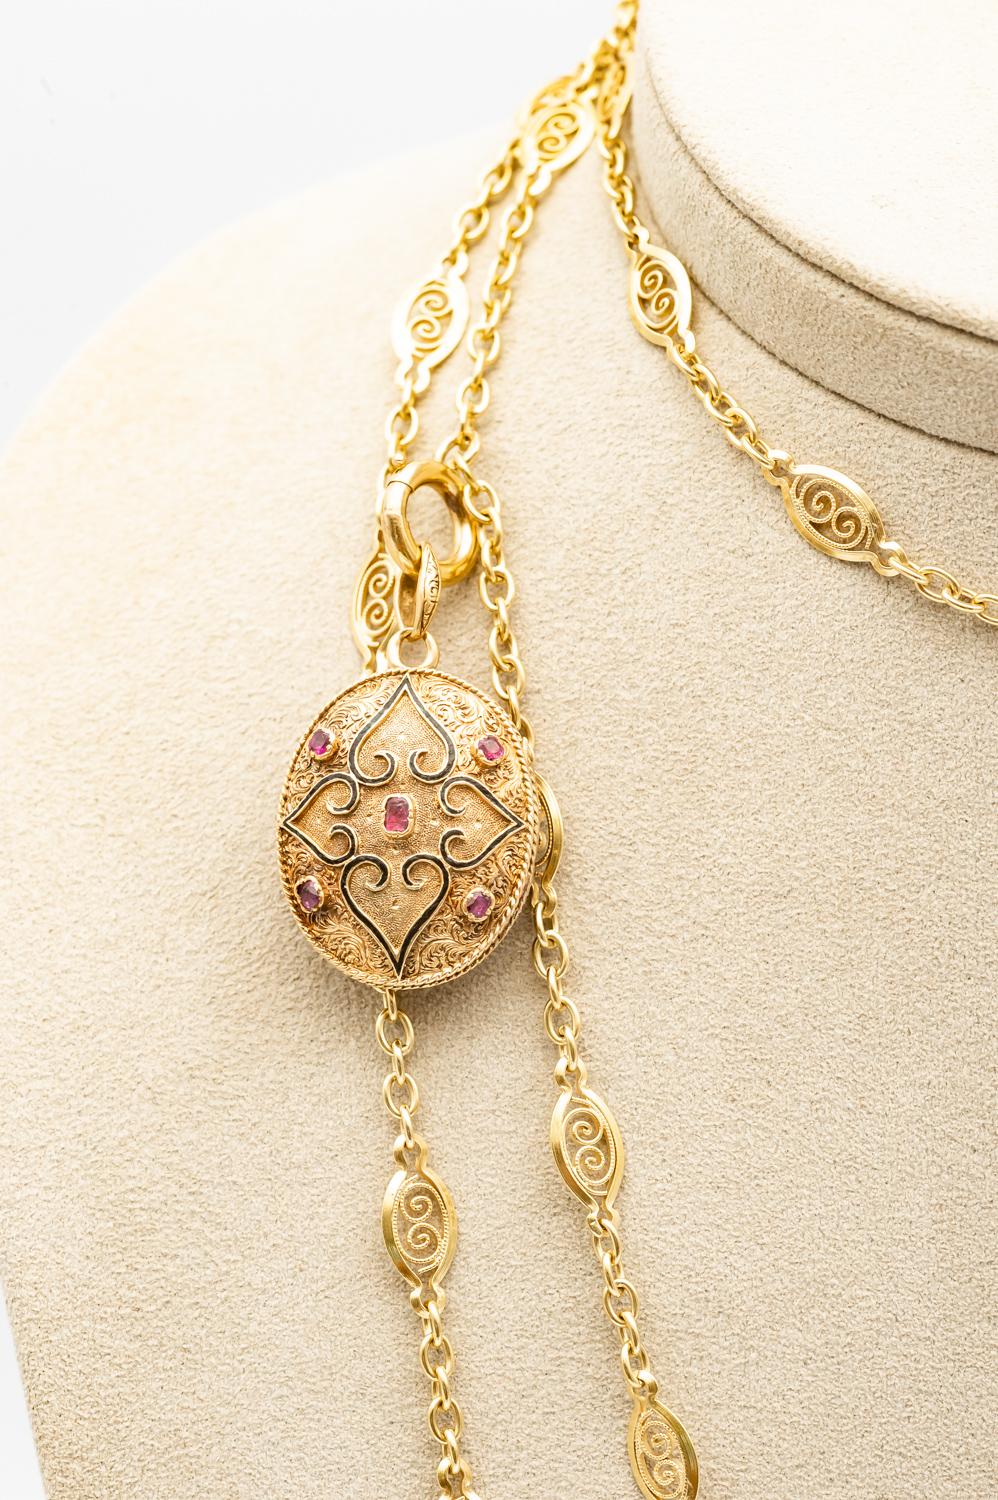 Antique 18K Yellow Gold Photo Holder Pendant
with Rubies and Fine Pearls

18 karat yellow gold handmade decorations on the front and back. In the front are positioned 5 Rubies, in the back are positioned 7 Rubies with 8 Fine Pearls. Keep your loved